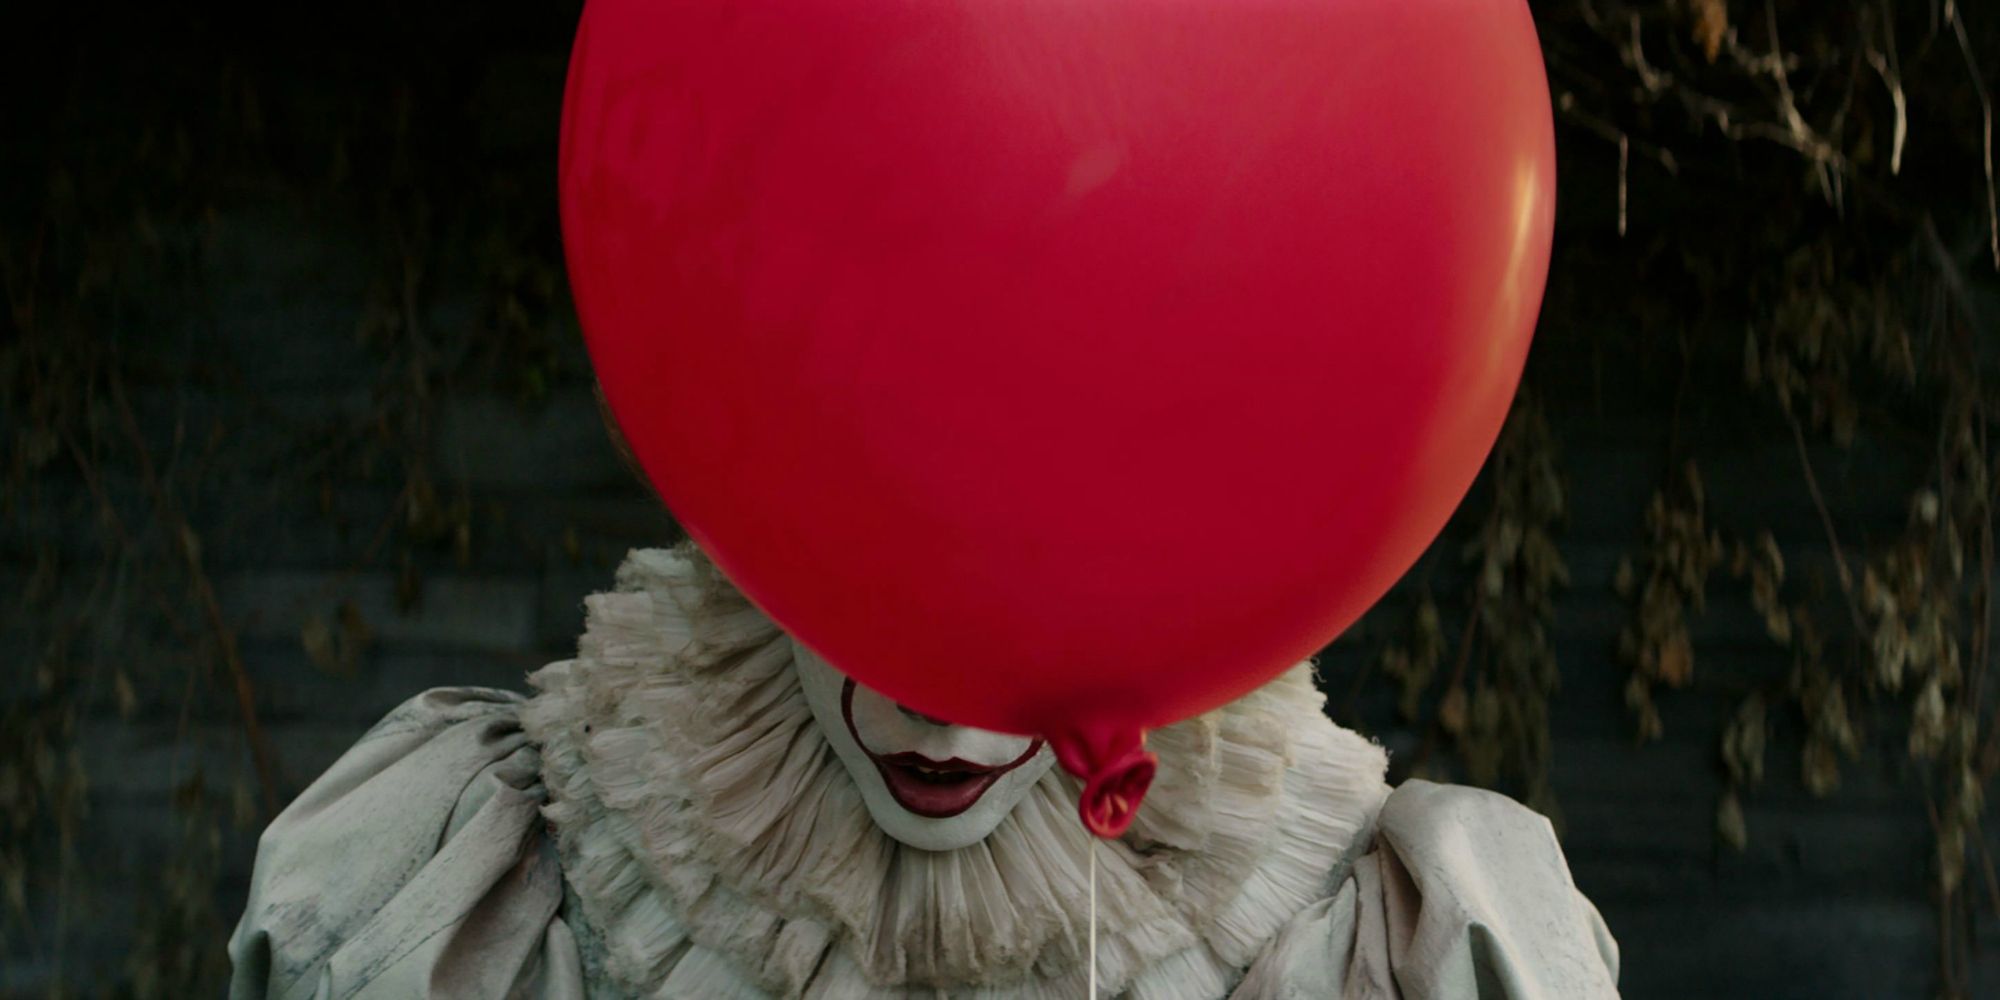 IT 2017 Pennywise Balloon Image